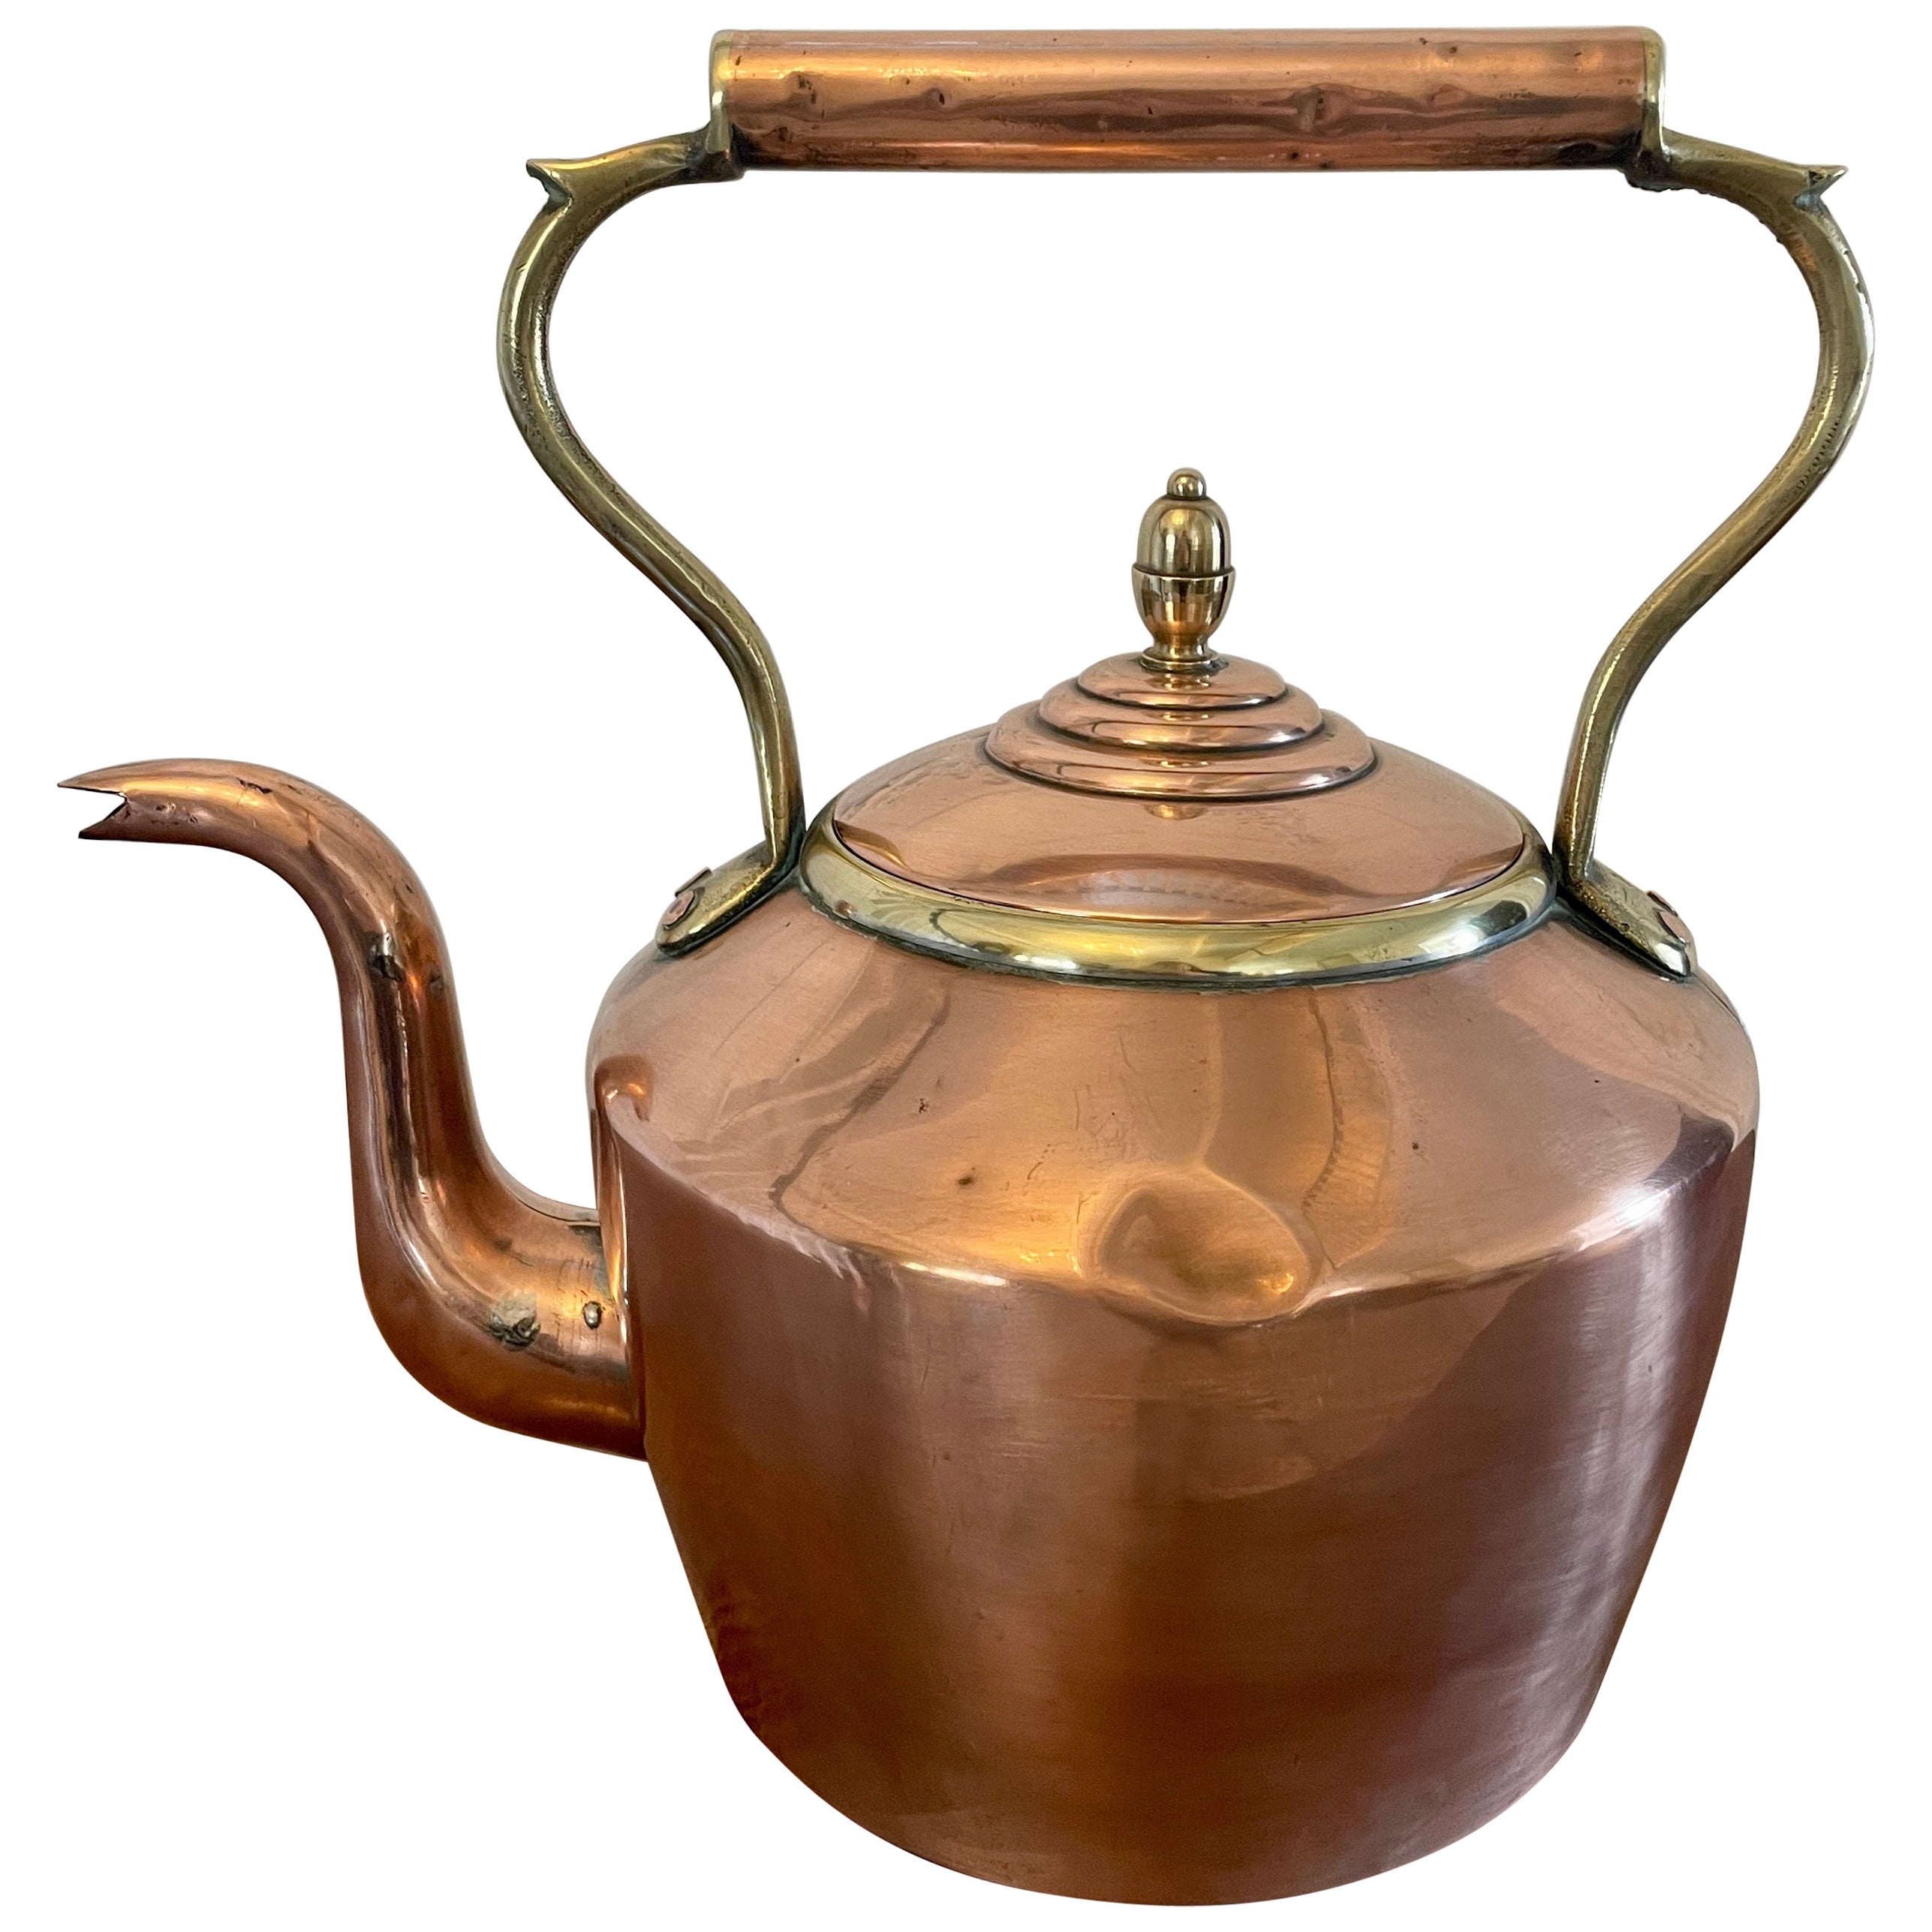 Can I use a vintage copper kettle?